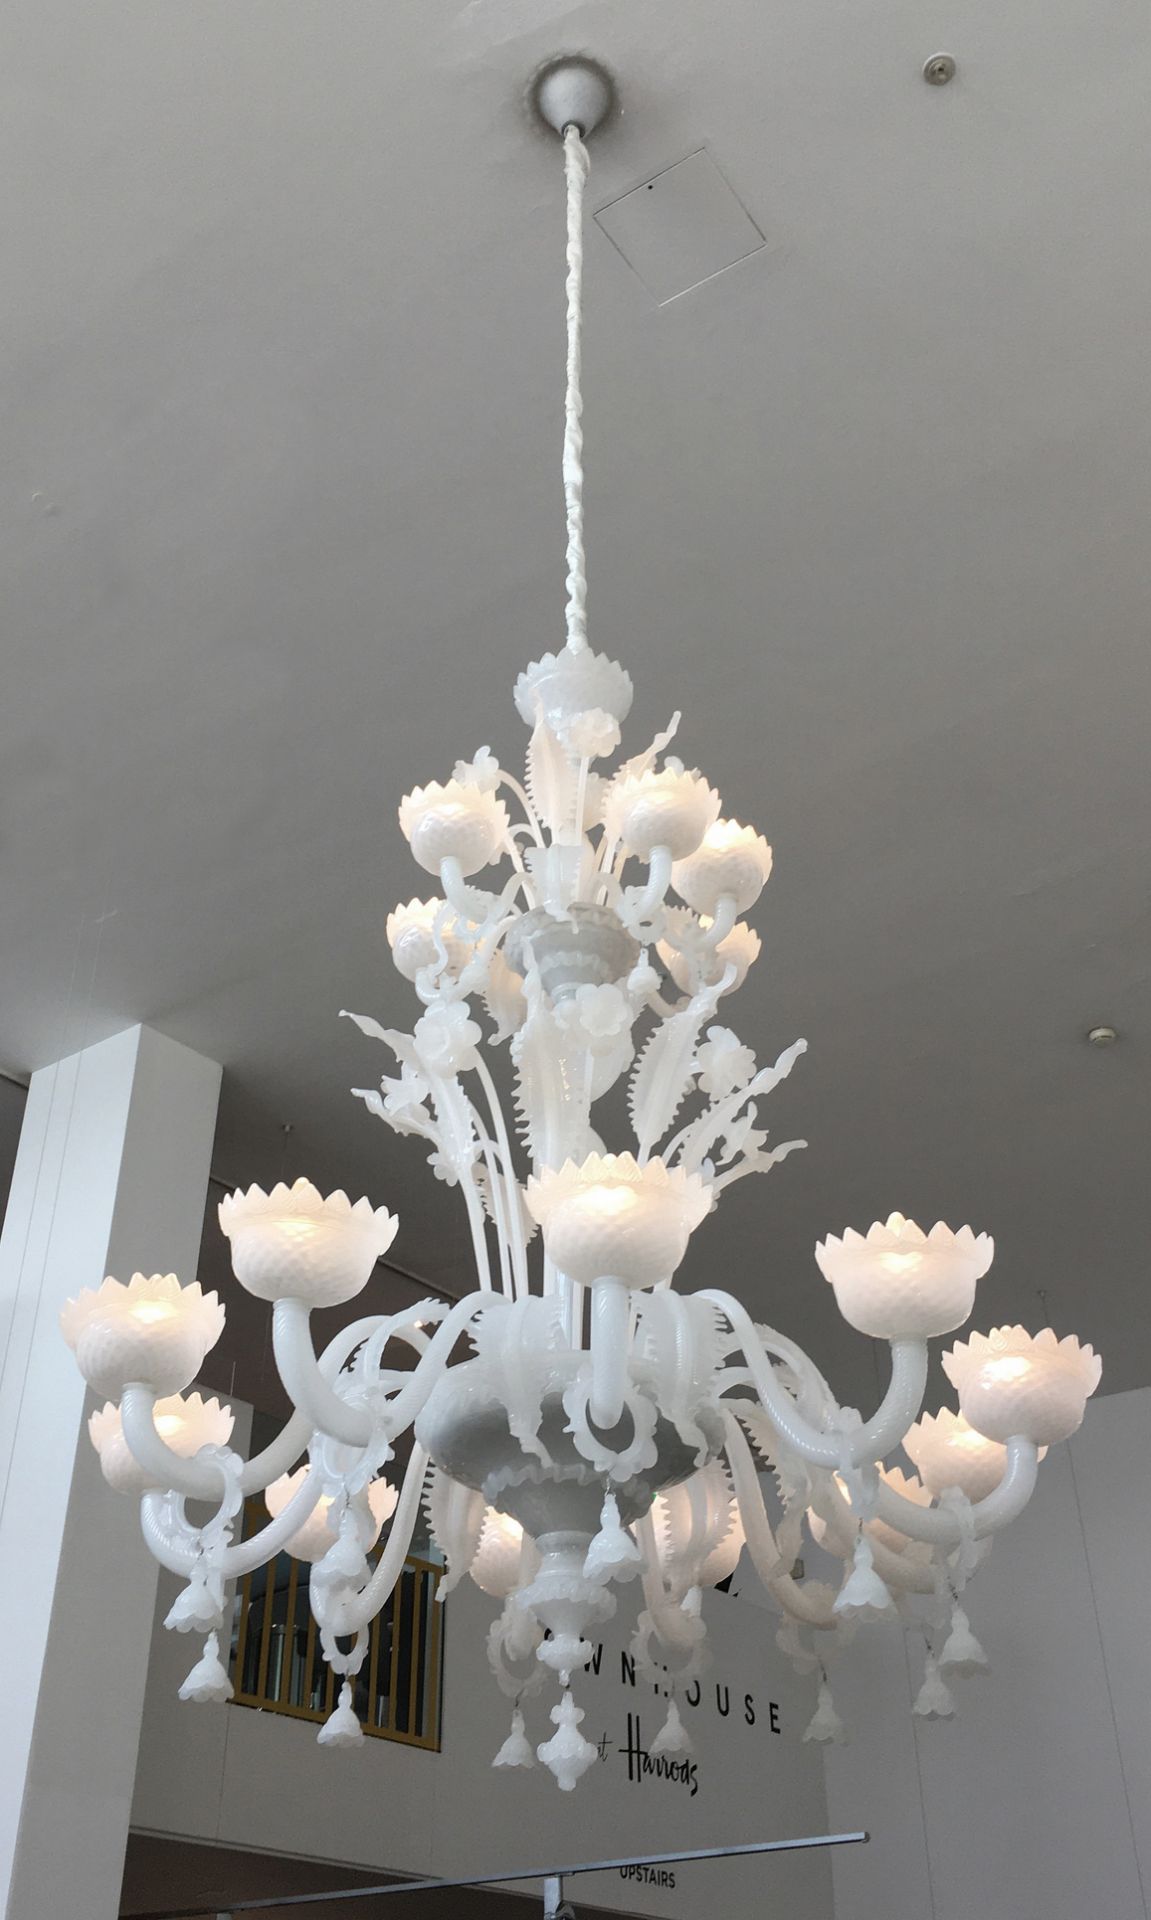 1 x Huge 1.8 Metre Tall Handcrafted 18-Arm Opal Glass Chandelier - Stunning Item - Ref: MHB137 - - Image 2 of 12